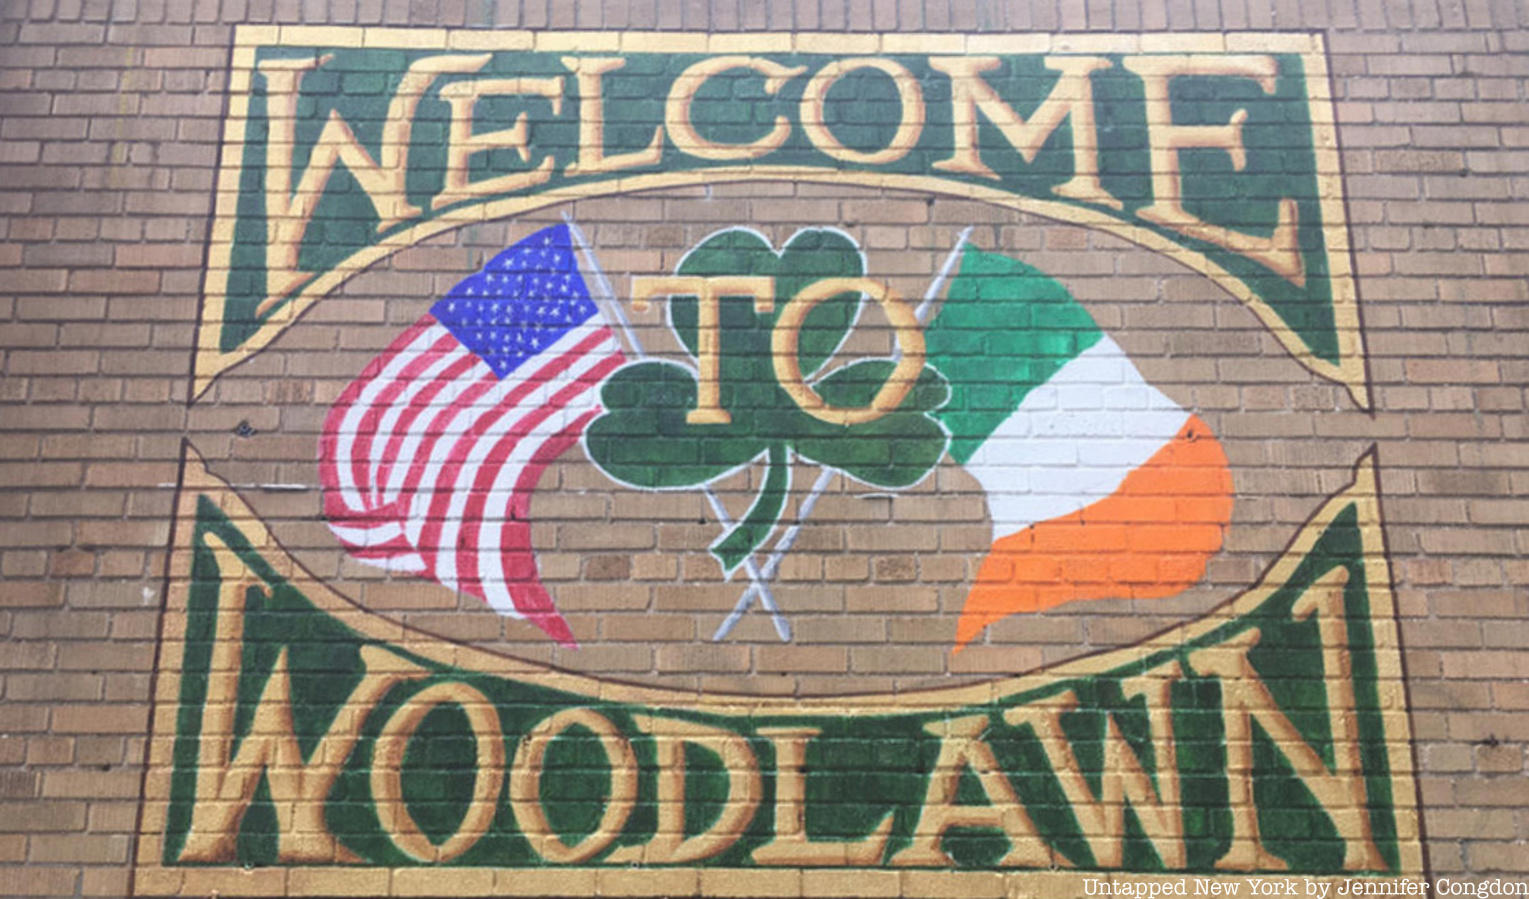 "Welcome to Woodlawn" painted sign on a brick wall with Irish and American flag